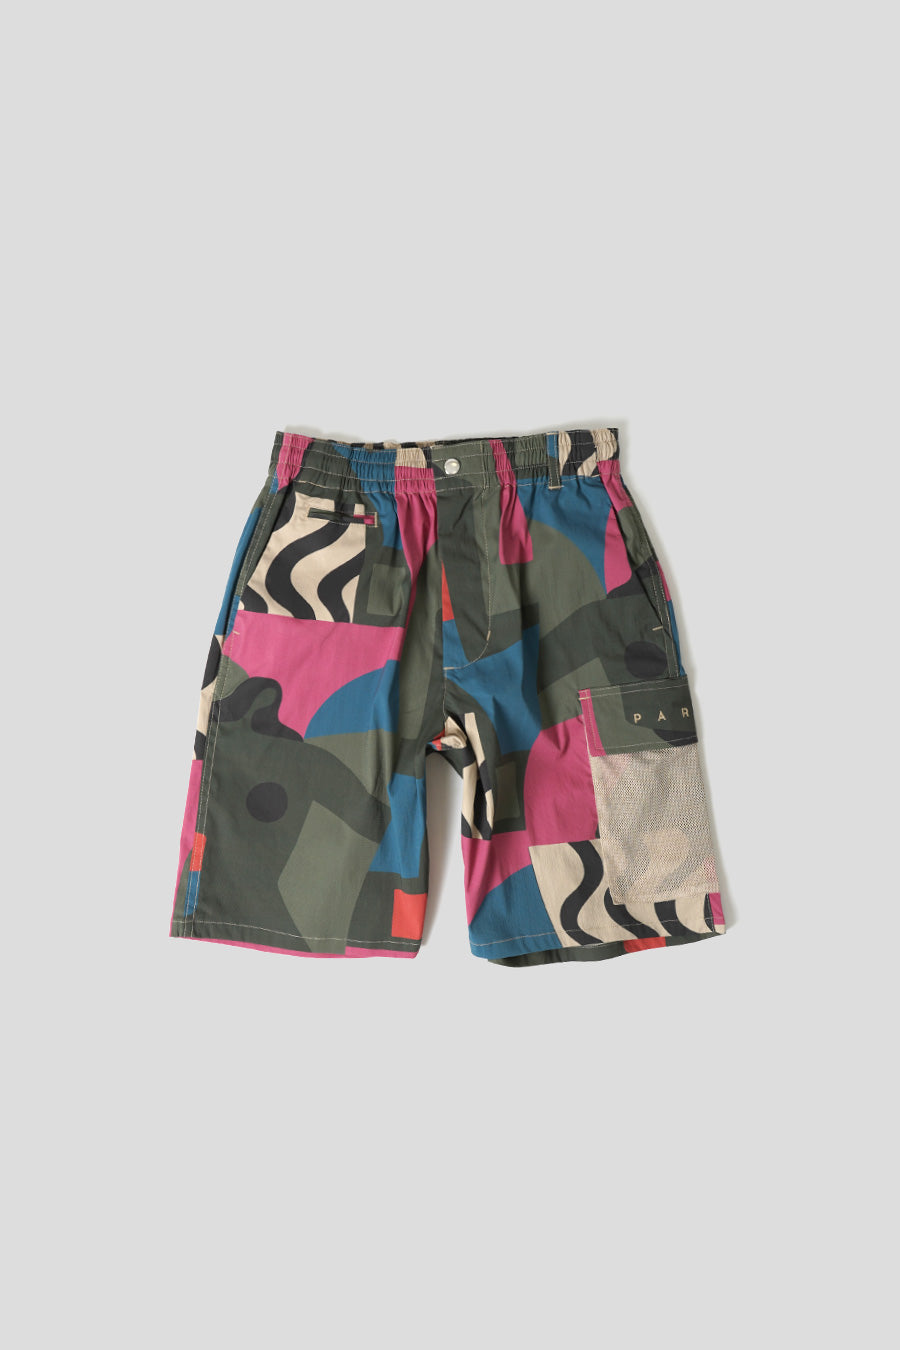 BY PARRA - PINK DISTORTED CAMO SHORT - LE LABO STORE